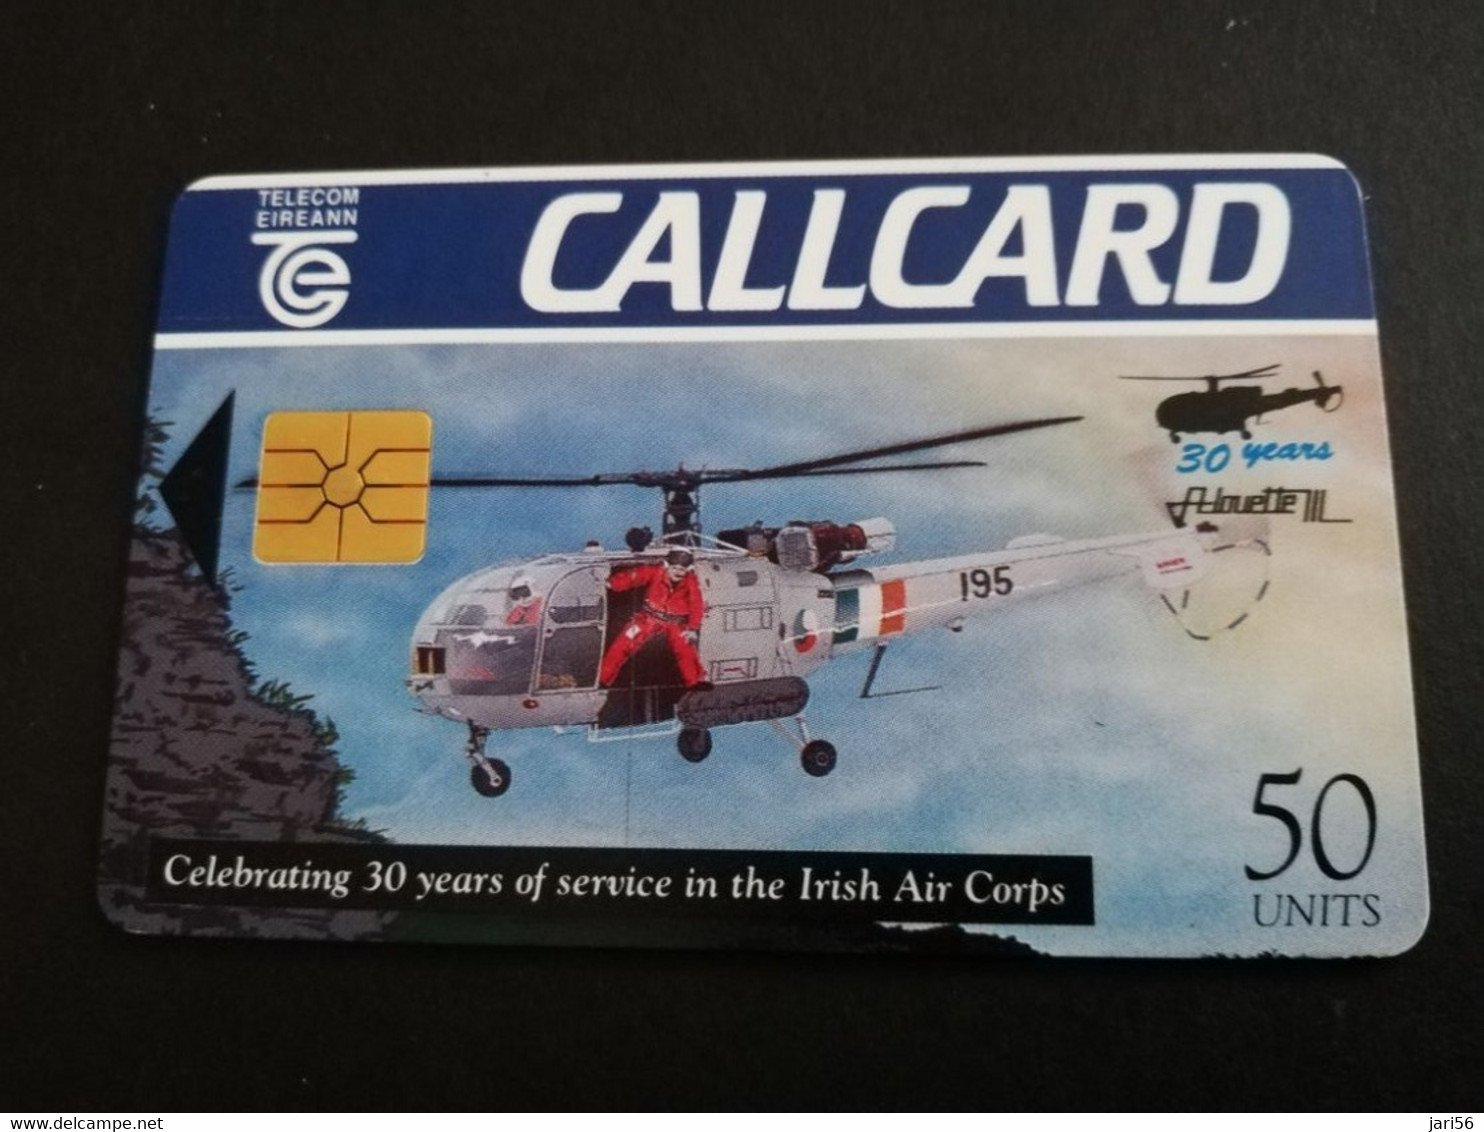 IRELAND /IERLANDE   CHIPCARD  50  UNITS  CELEBRATING IRISH AIR CORPS  HELICOPTER/ALOUETTE            CHIP   ** 5265** - Irlande